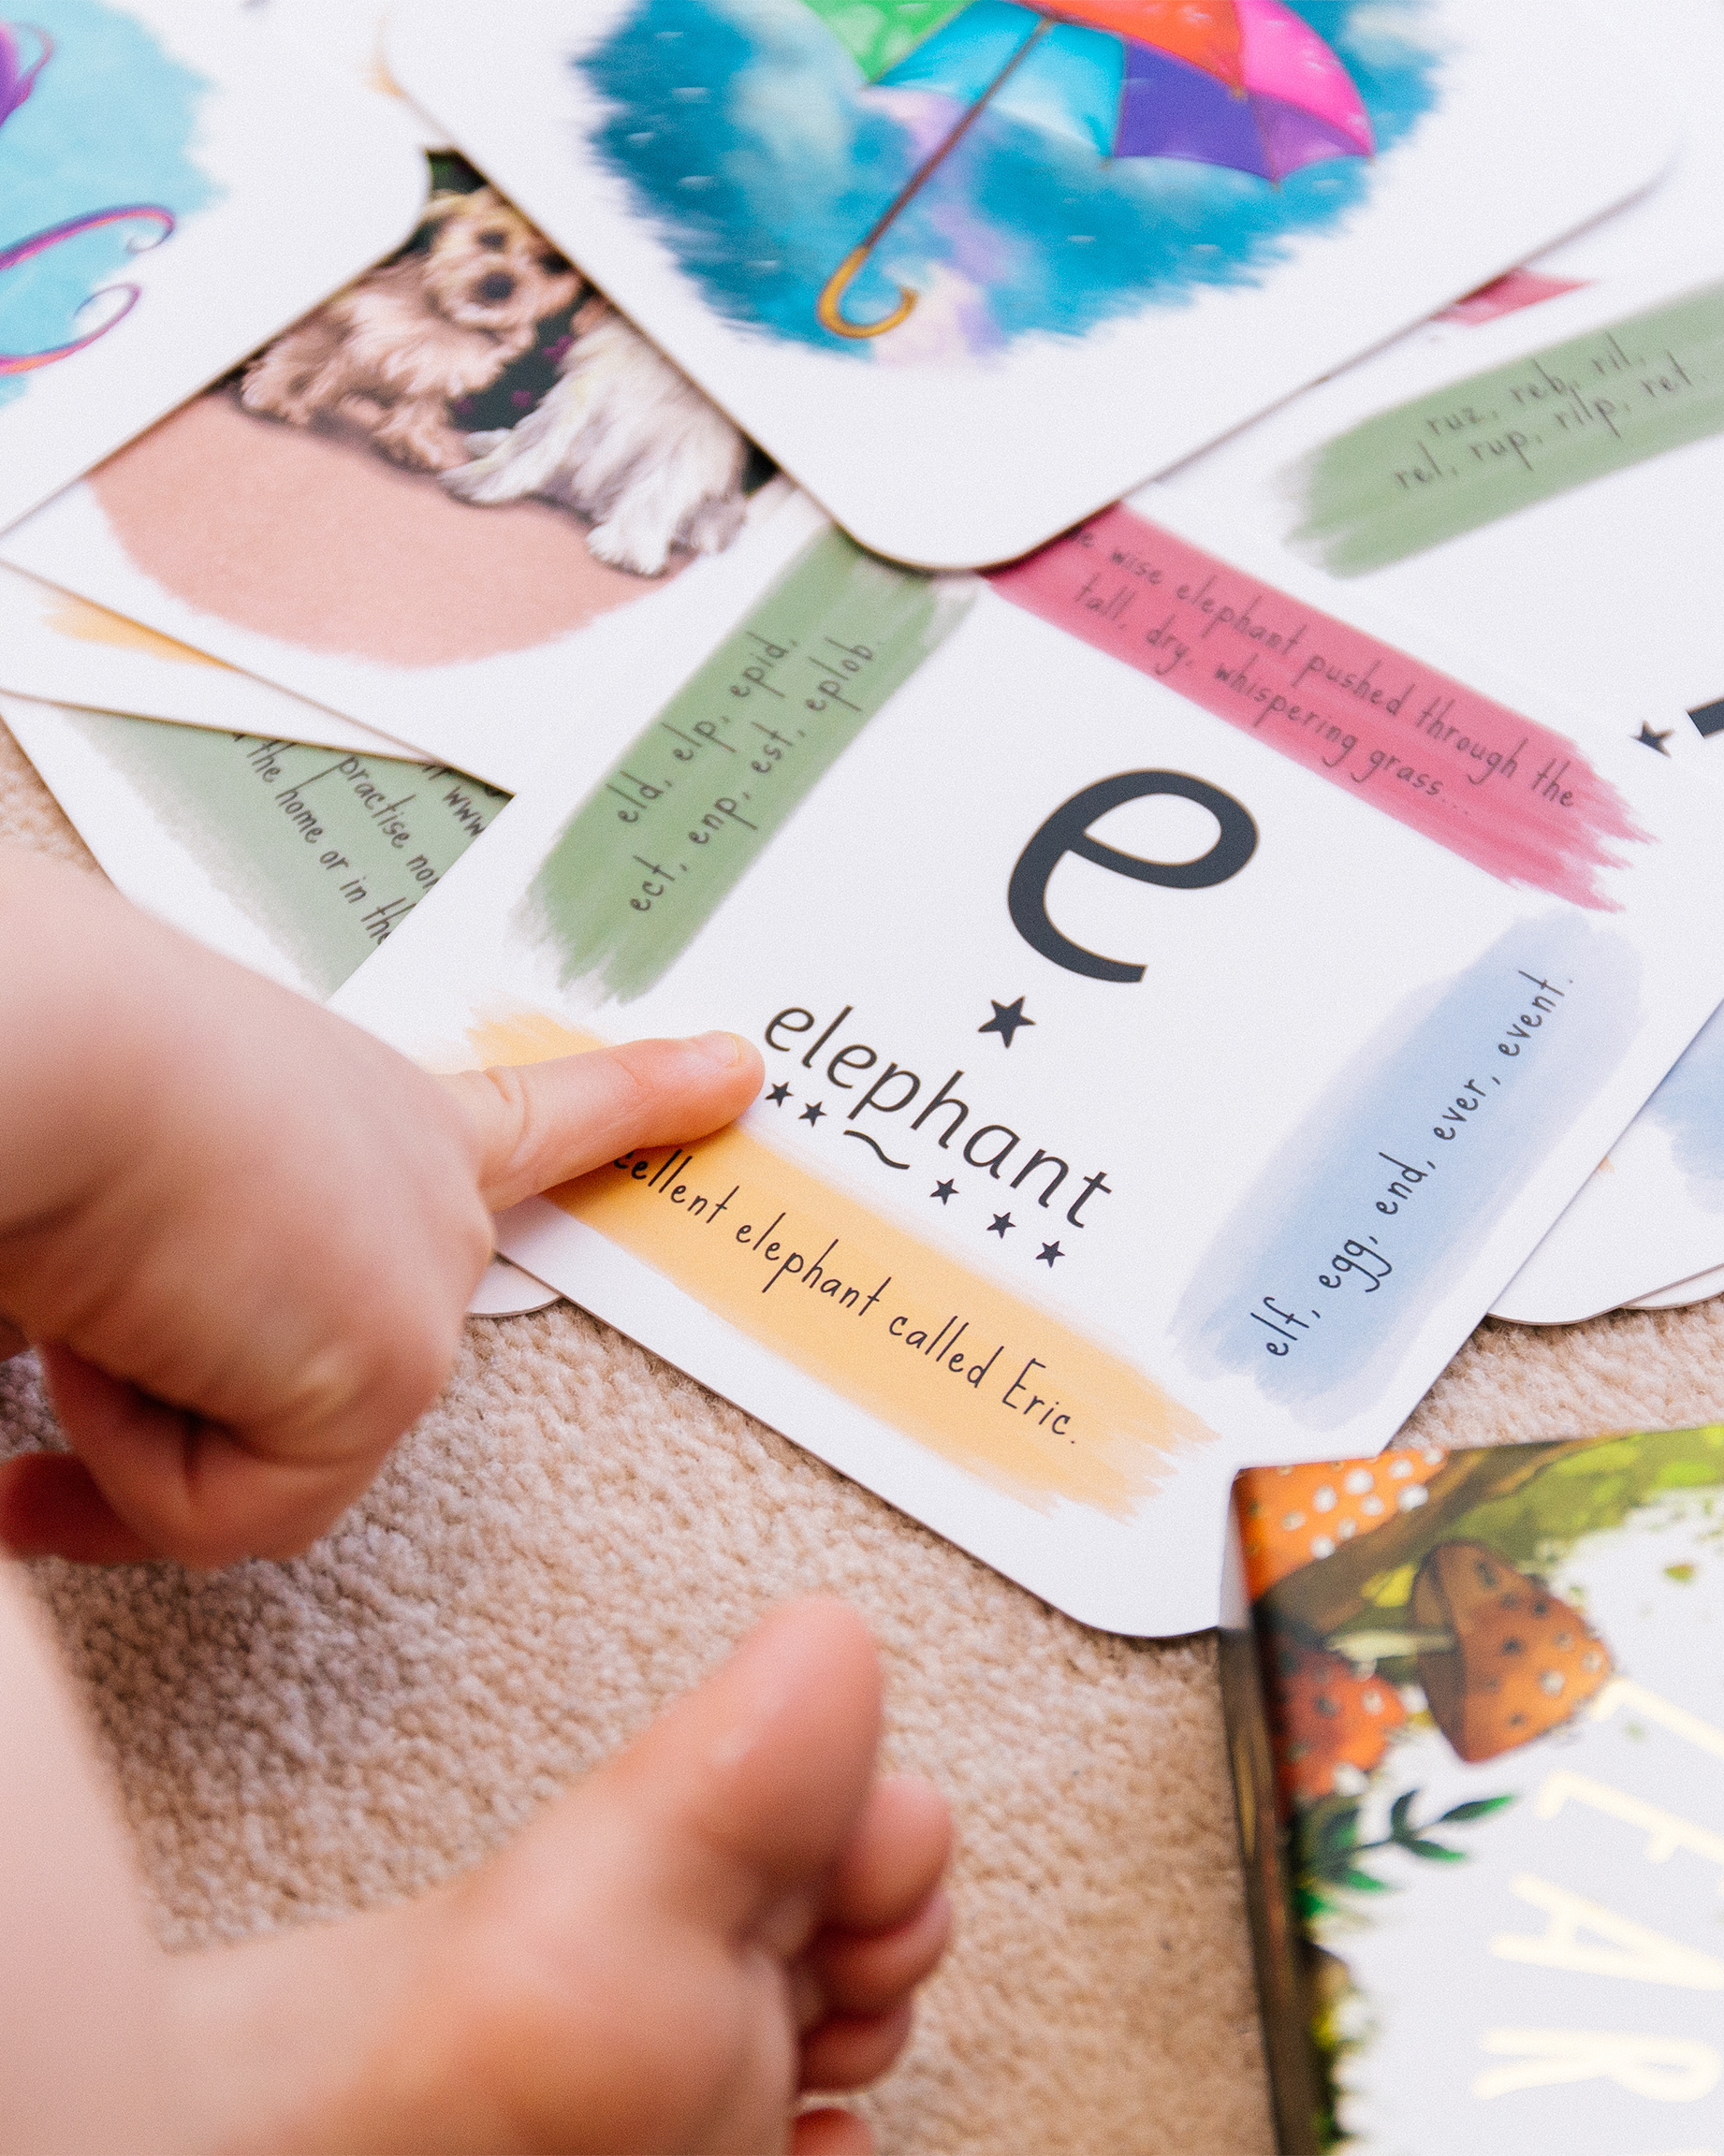 finger pointing to key sound on phonic card.